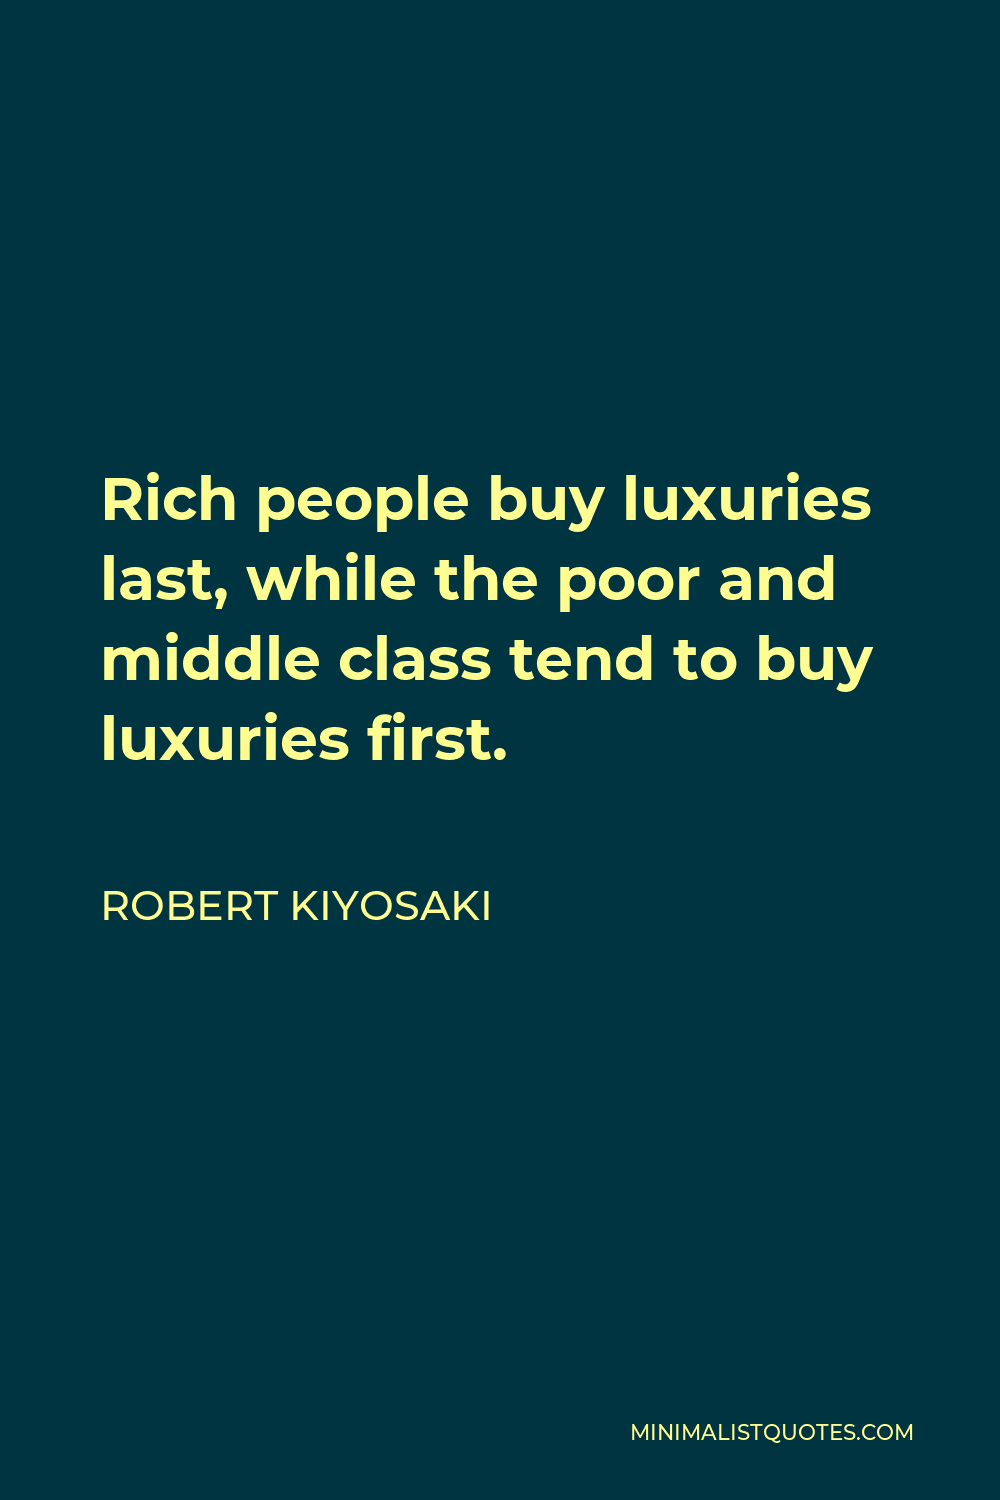 Robert Kiyosaki Quote - Rich people buy luxuries last, while the poor and middle class tend to buy luxuries first.